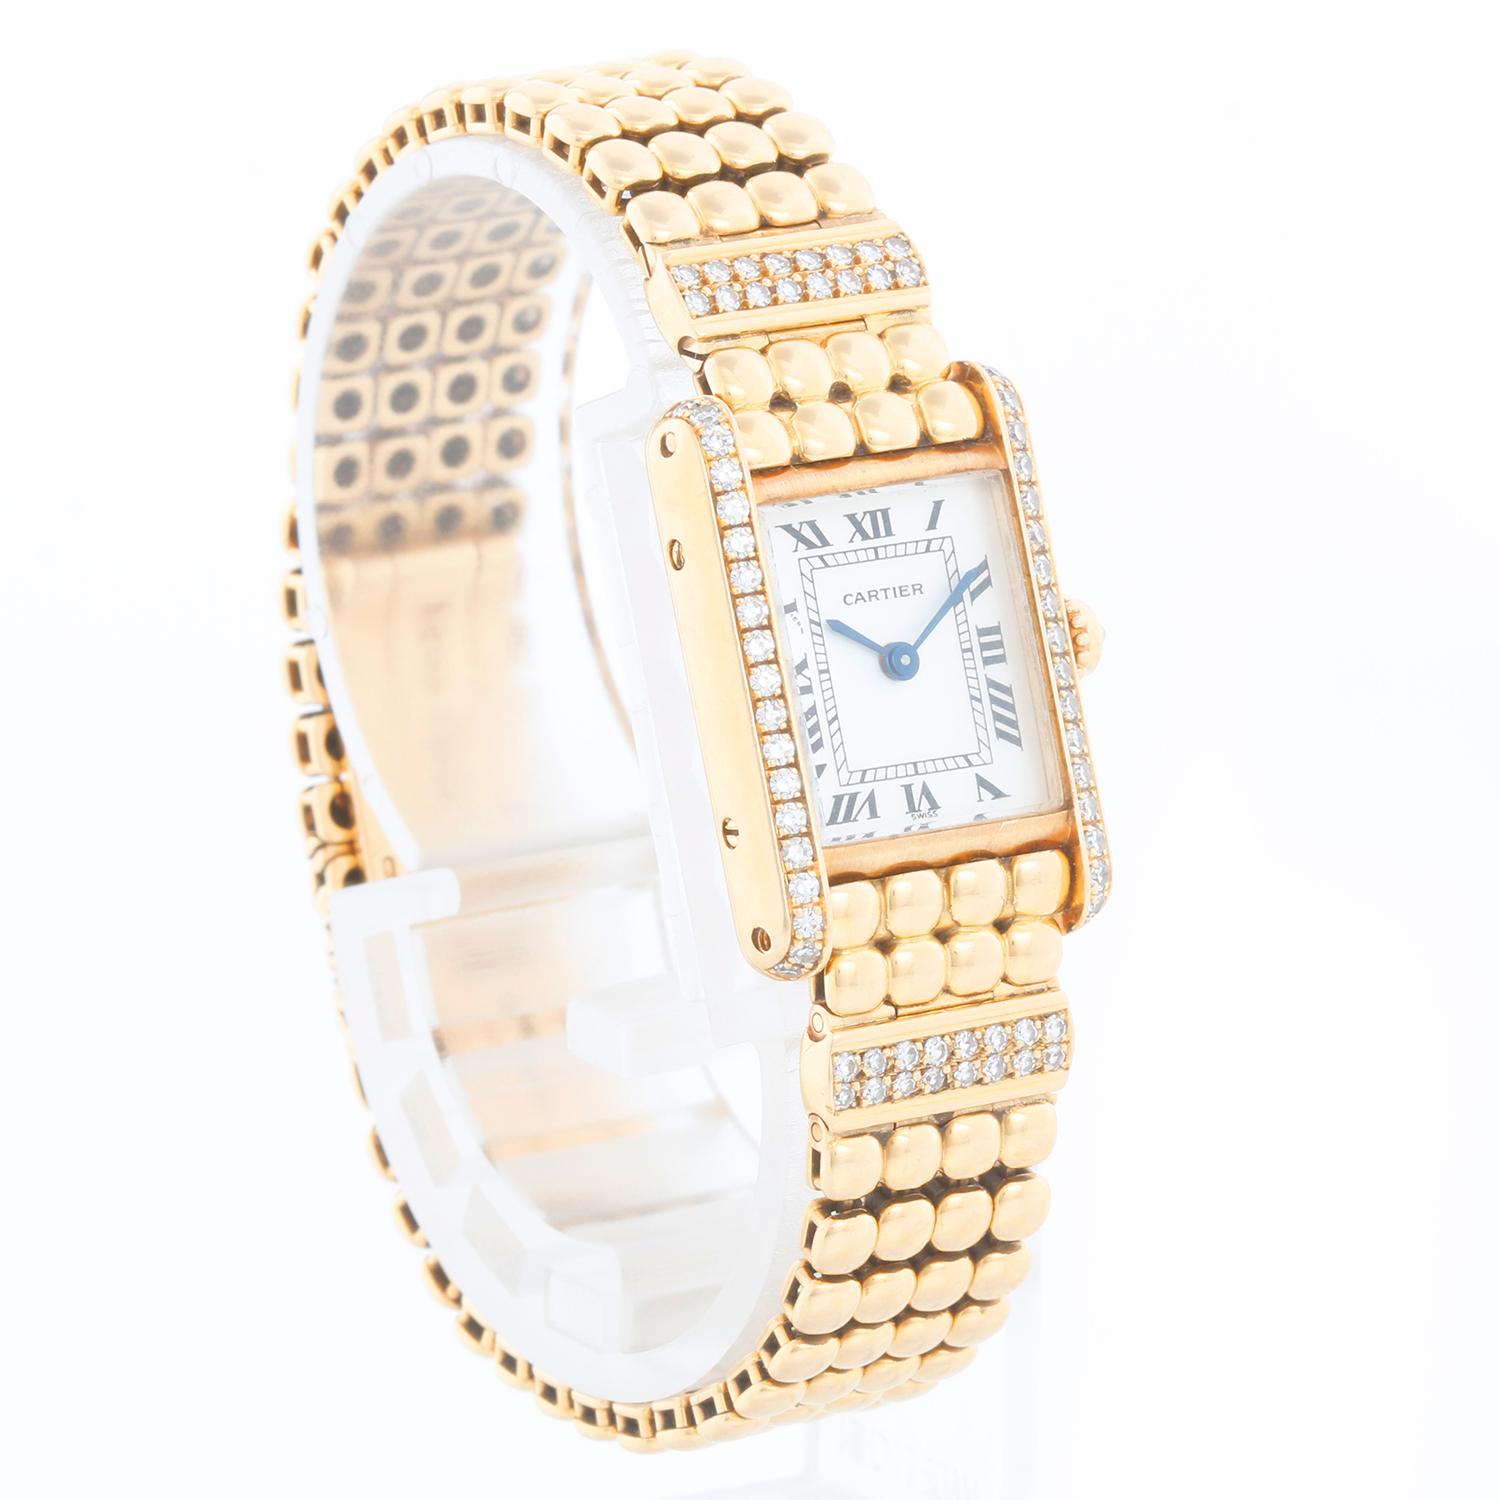 Rare & Unusual Cartier 18K Yellow Gold Tank Ladies Watch 8057 In Excellent Condition For Sale In Dallas, TX